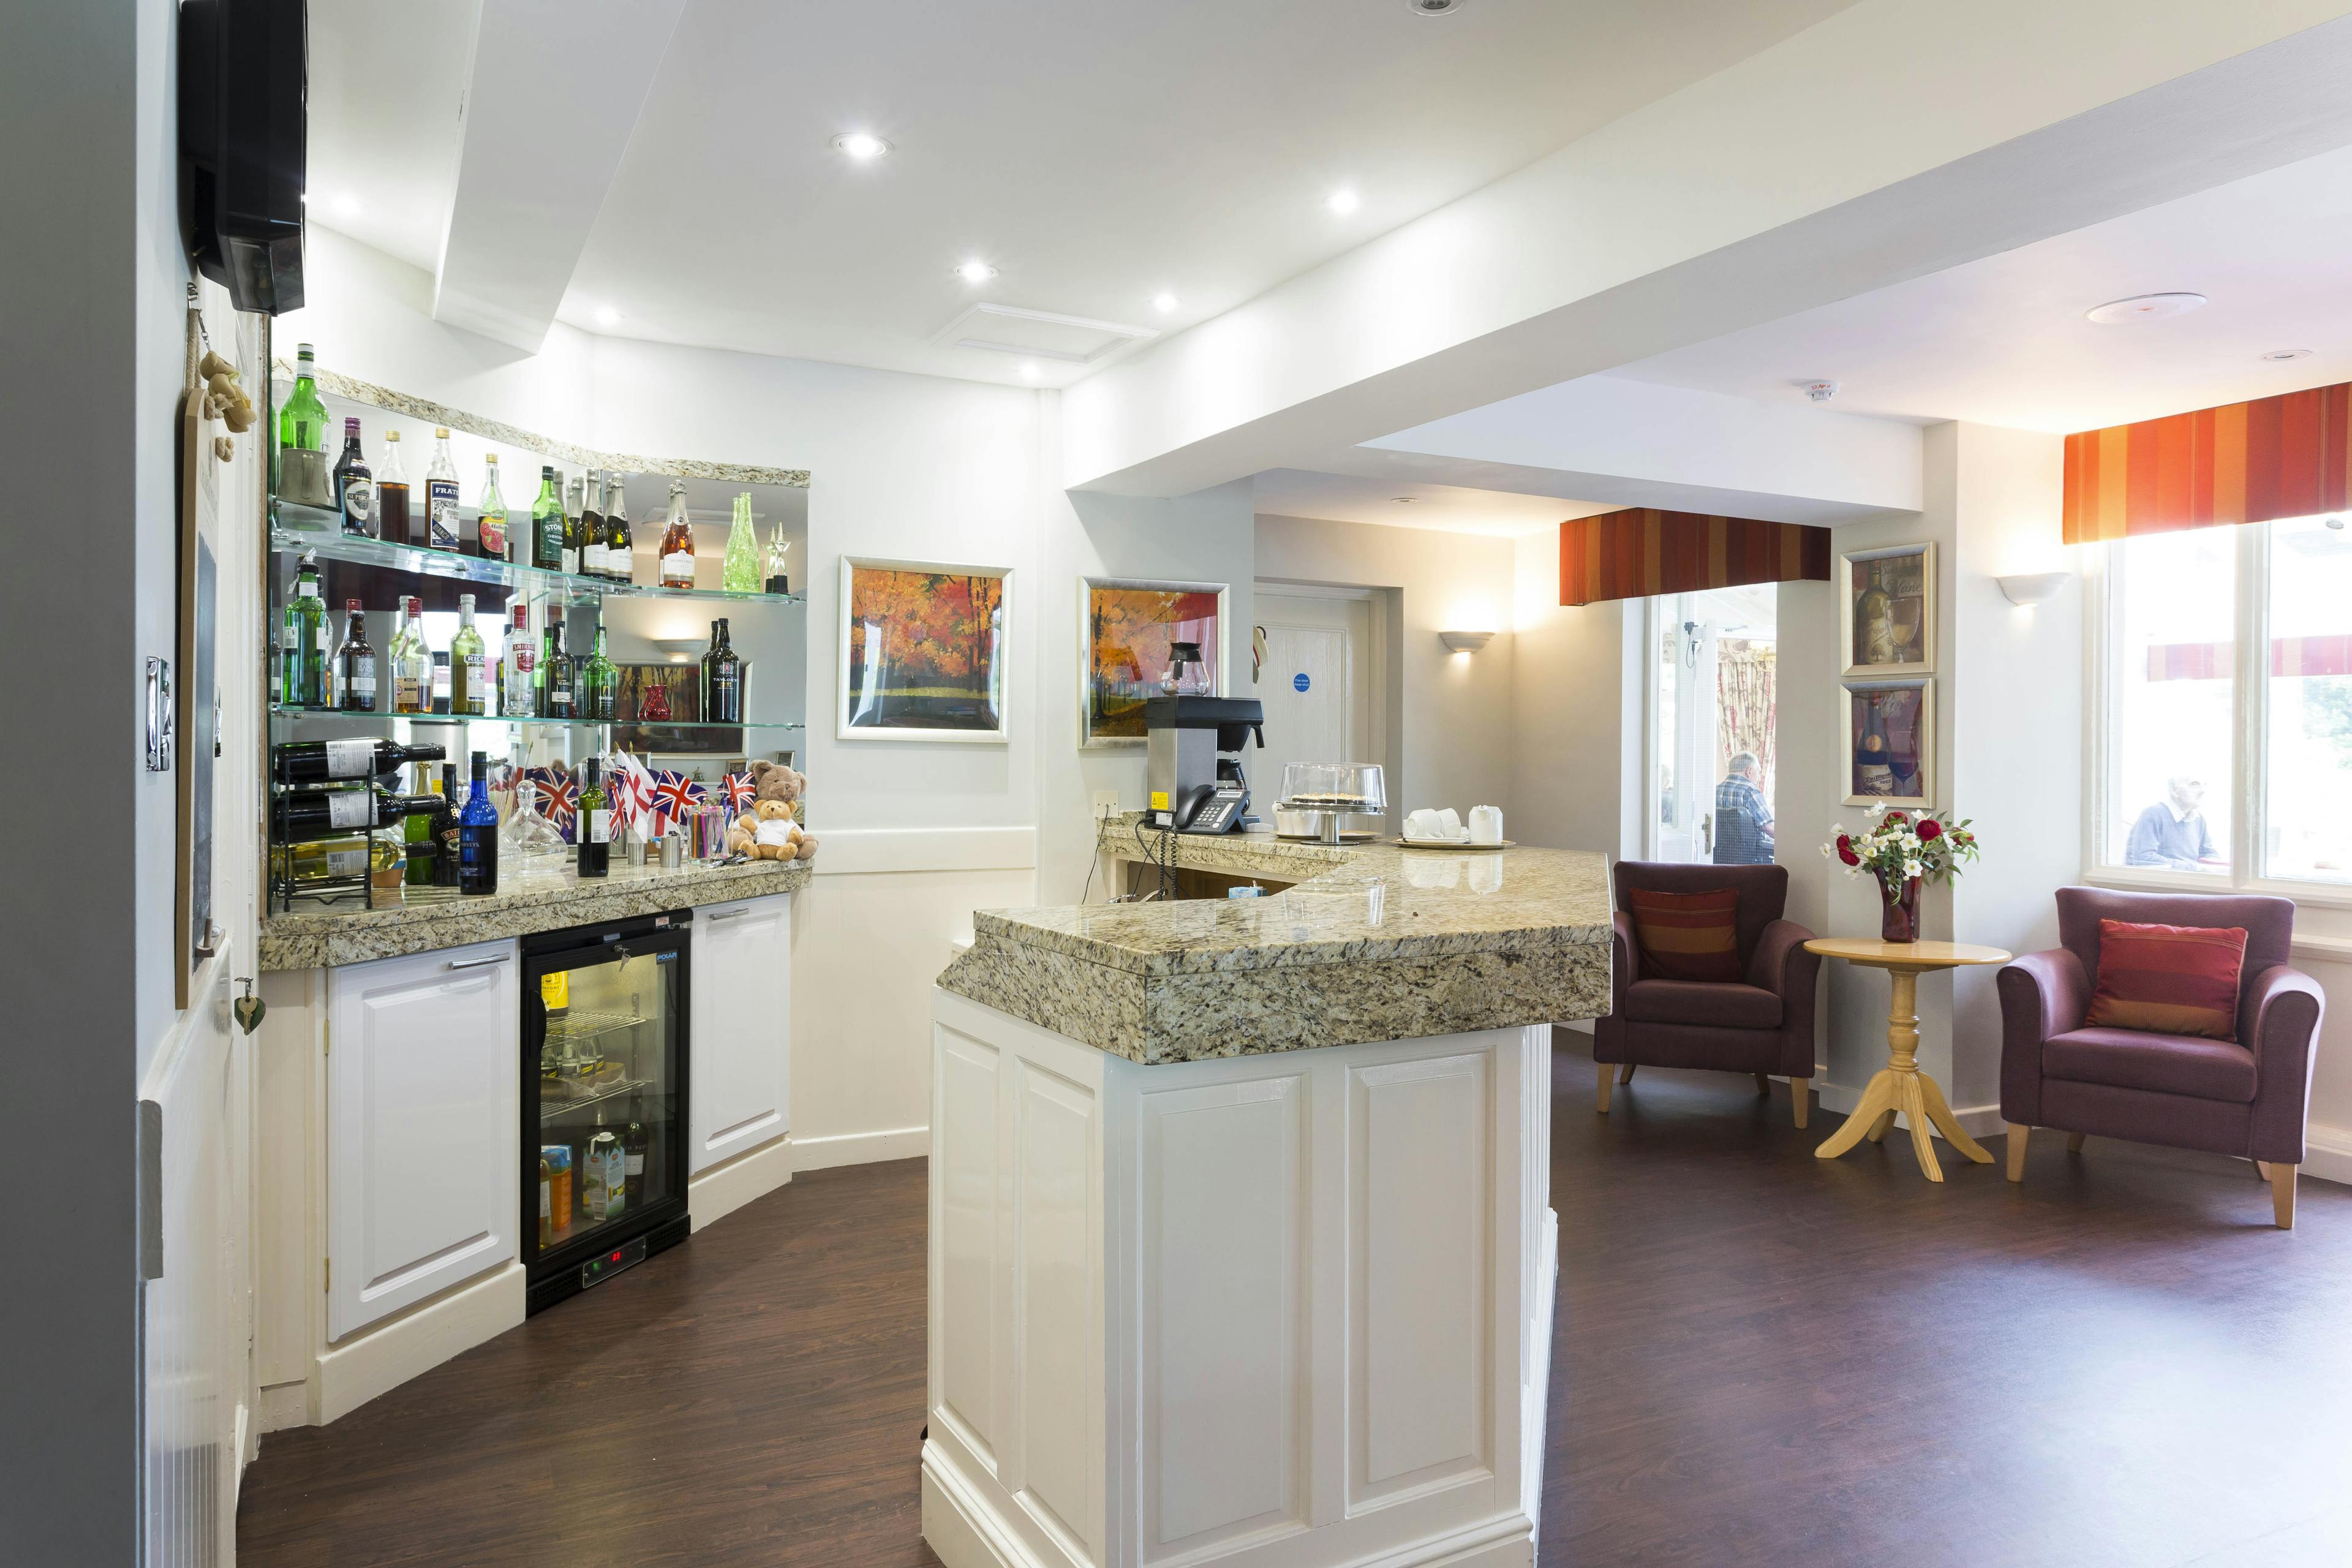 Bar at Prestbury Beaumont Care Home in Macclesfield, Cheshire